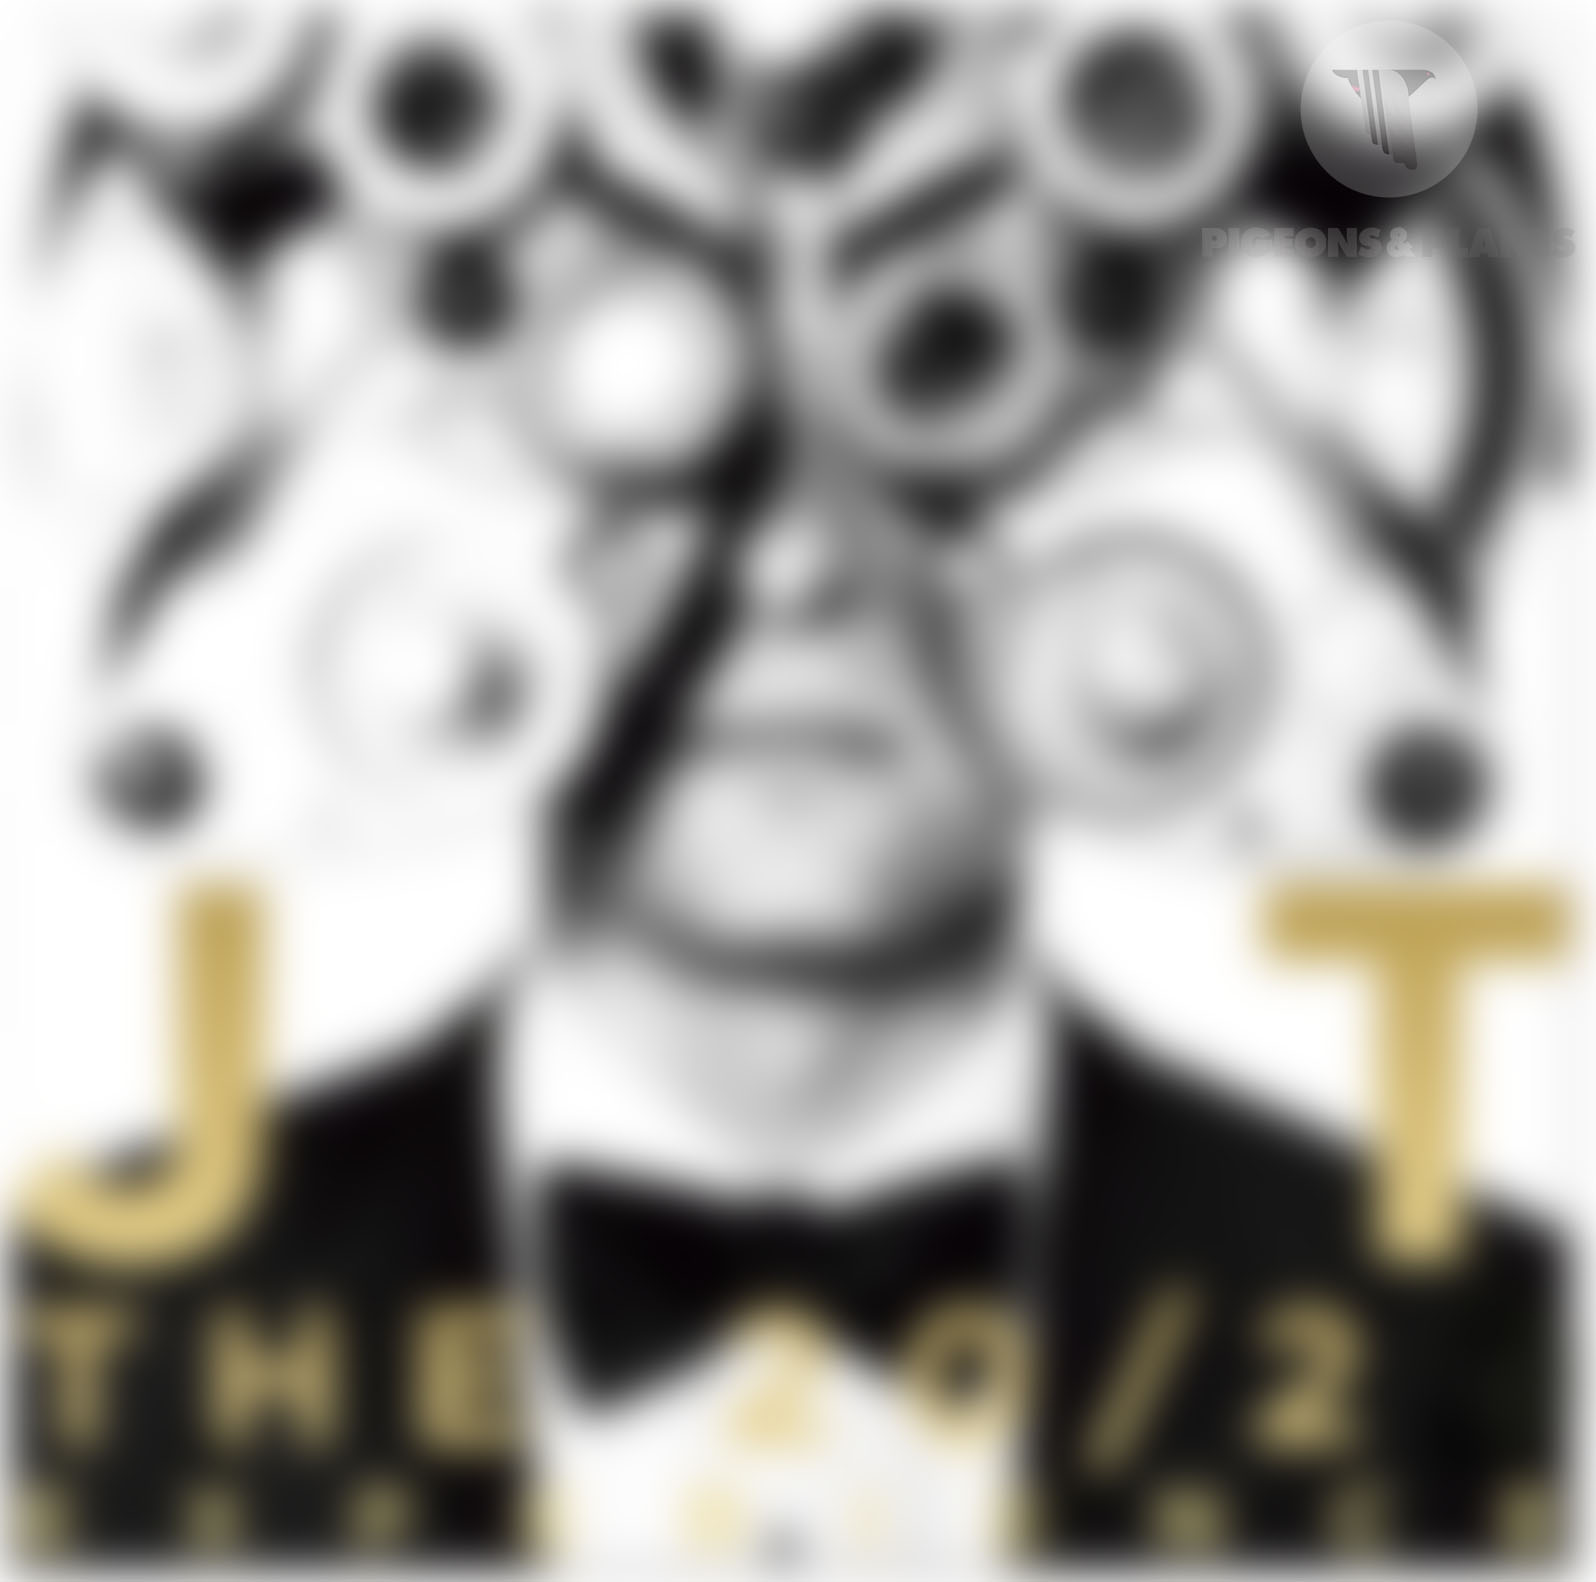 Justin Timberlake – The 20/20 Experience